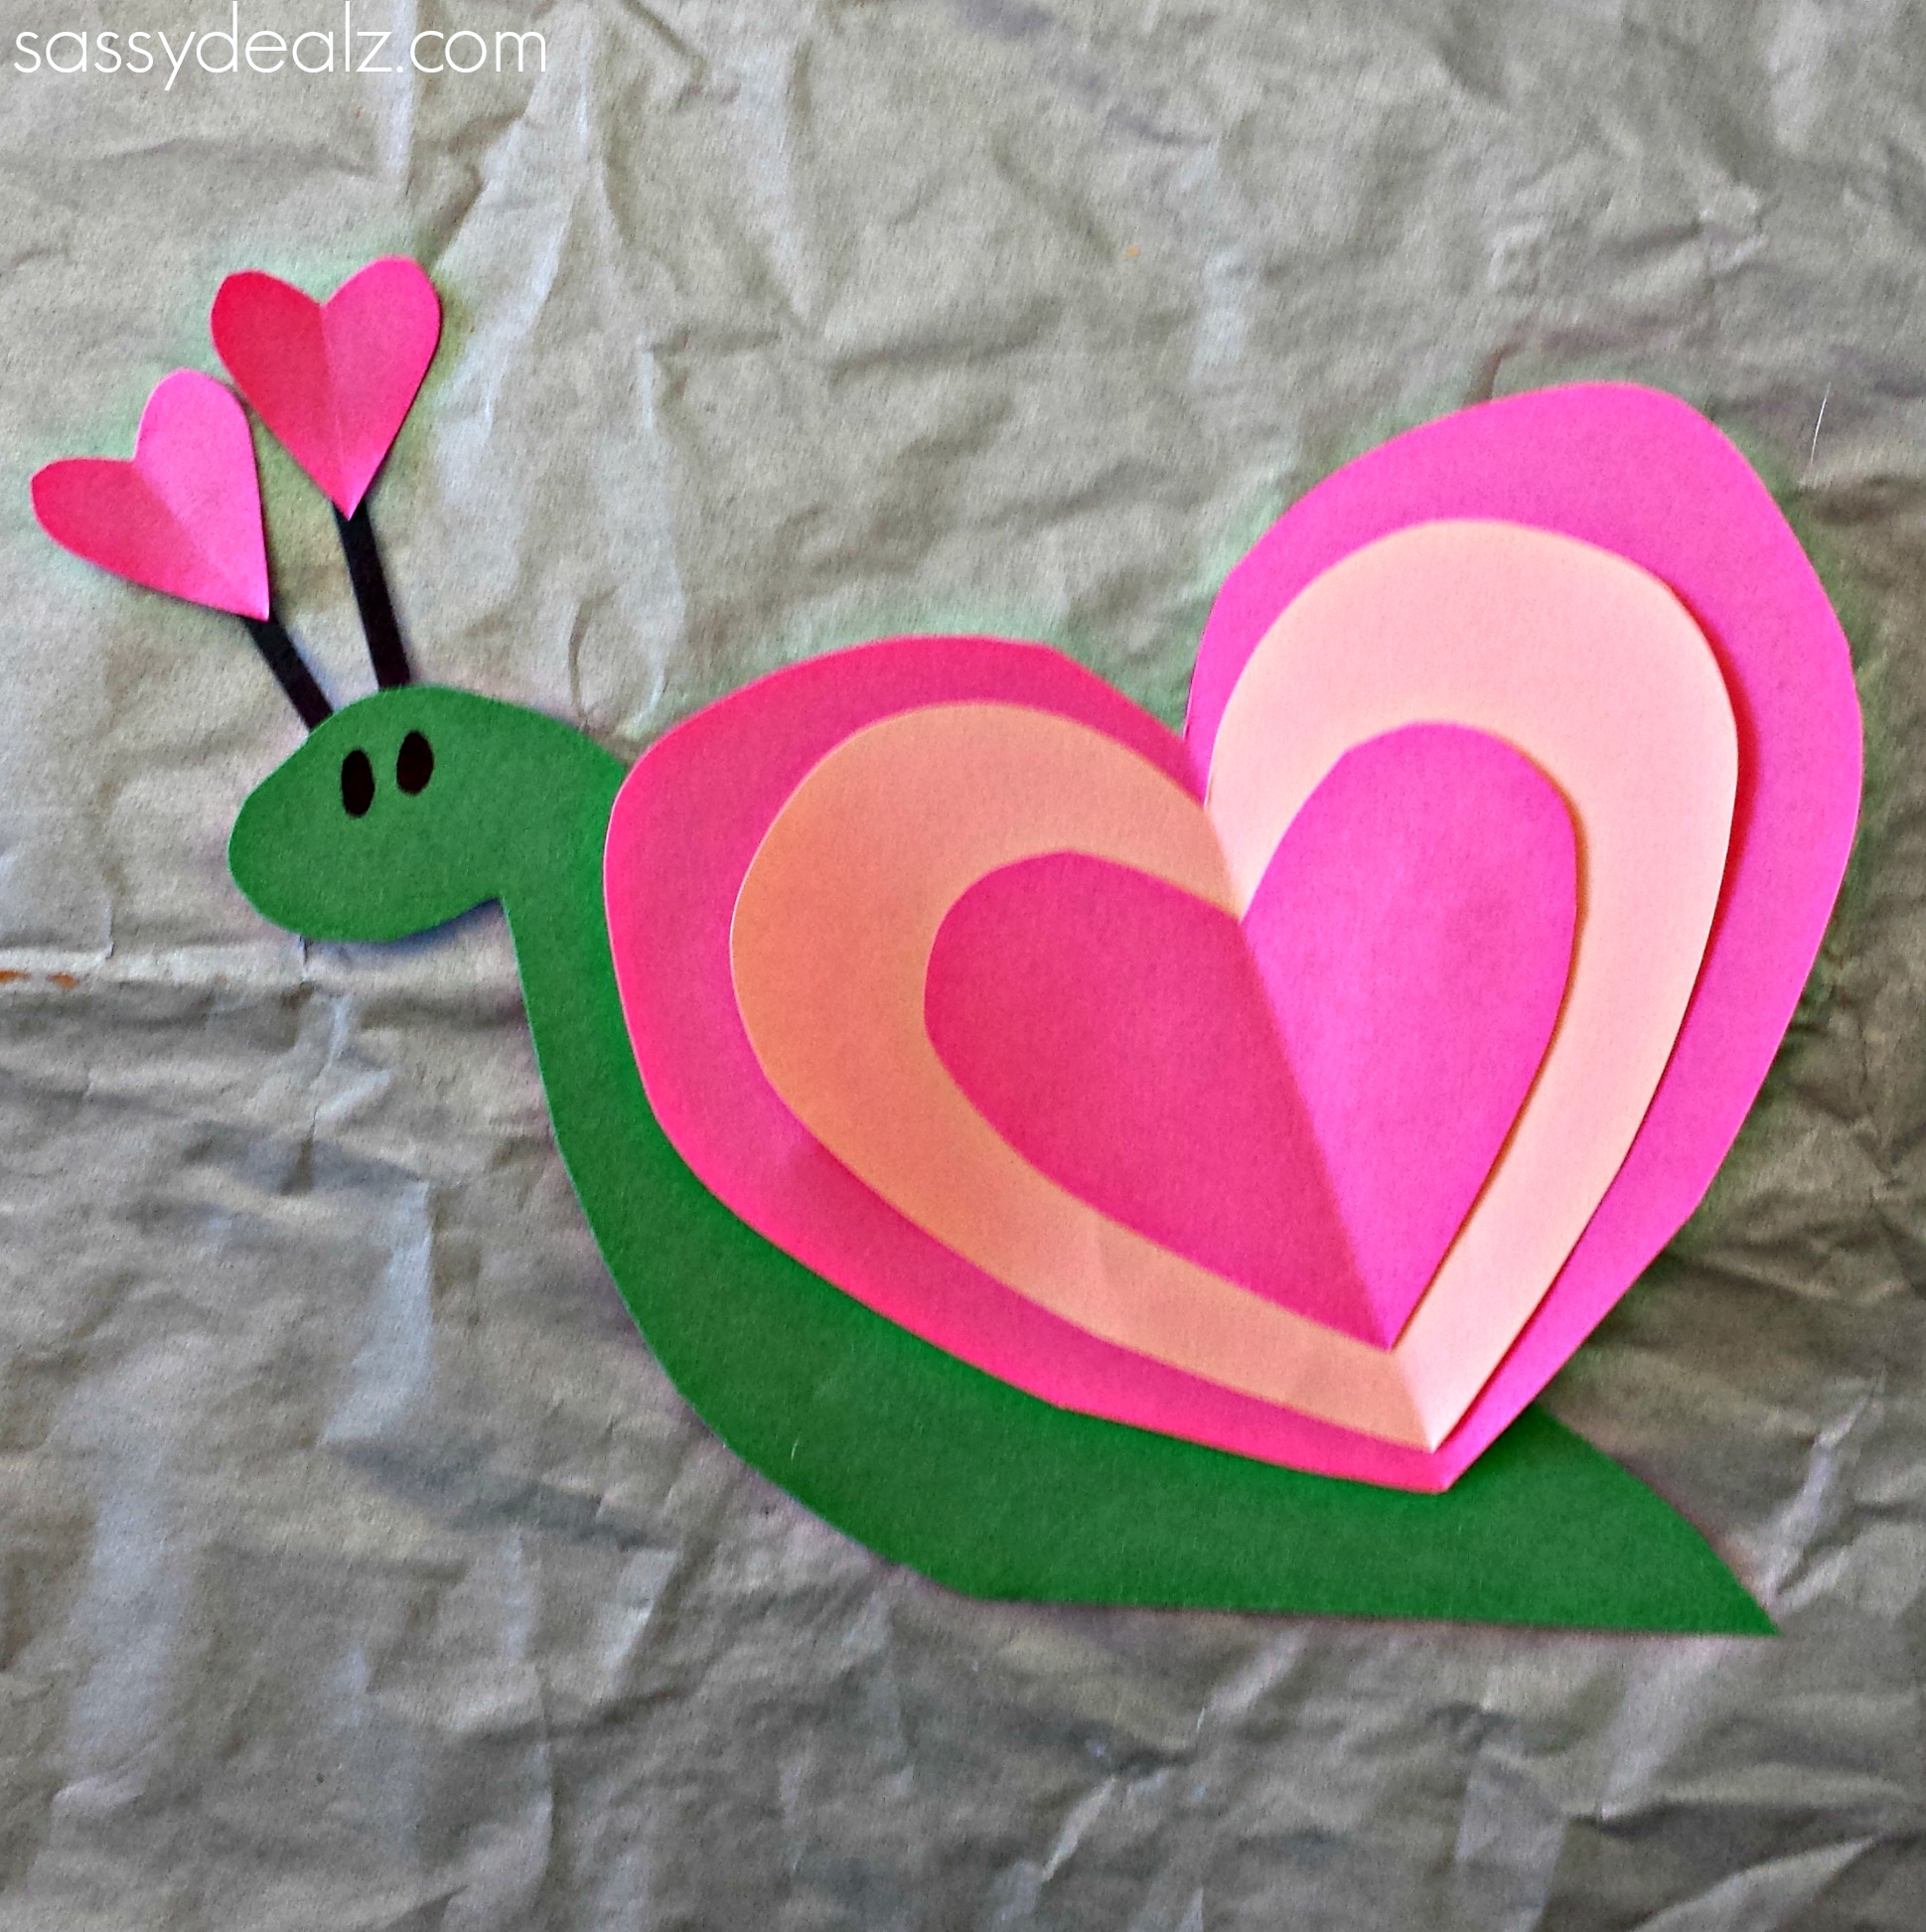 Heart Snail Craft For Kids (Valentine Art Project) - Crafty Morning